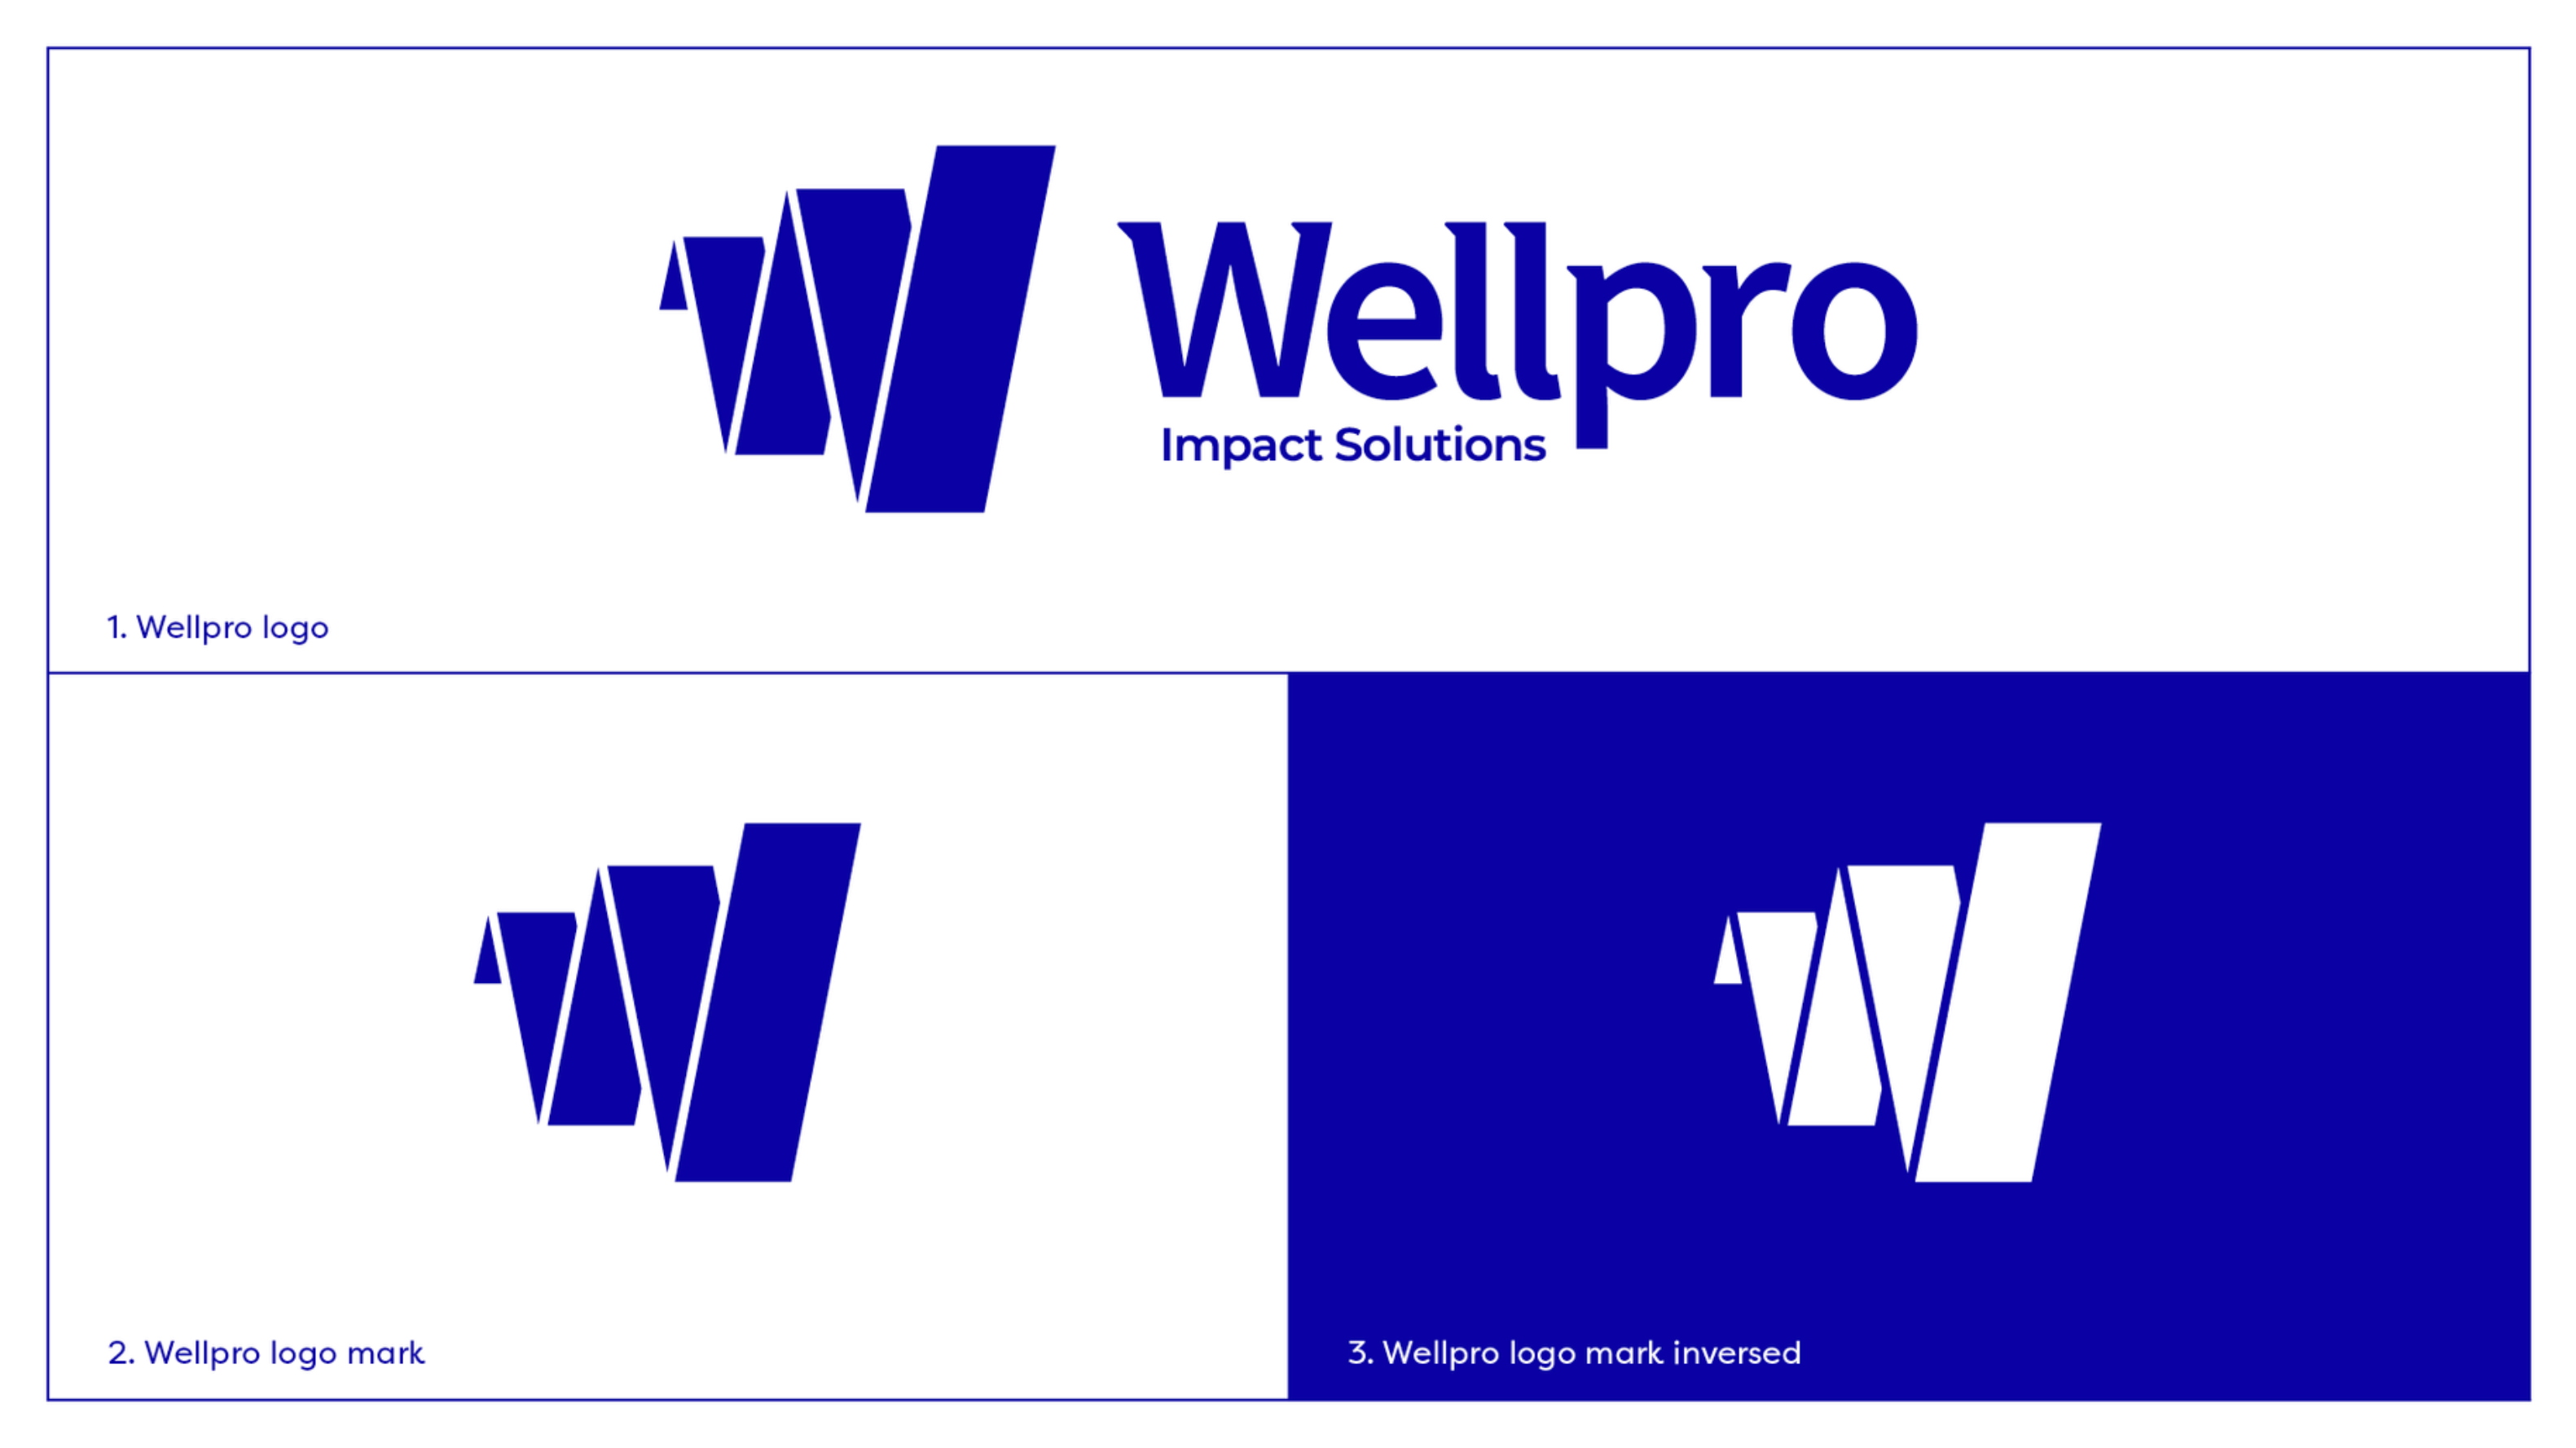 Wellpro Impact Solutions